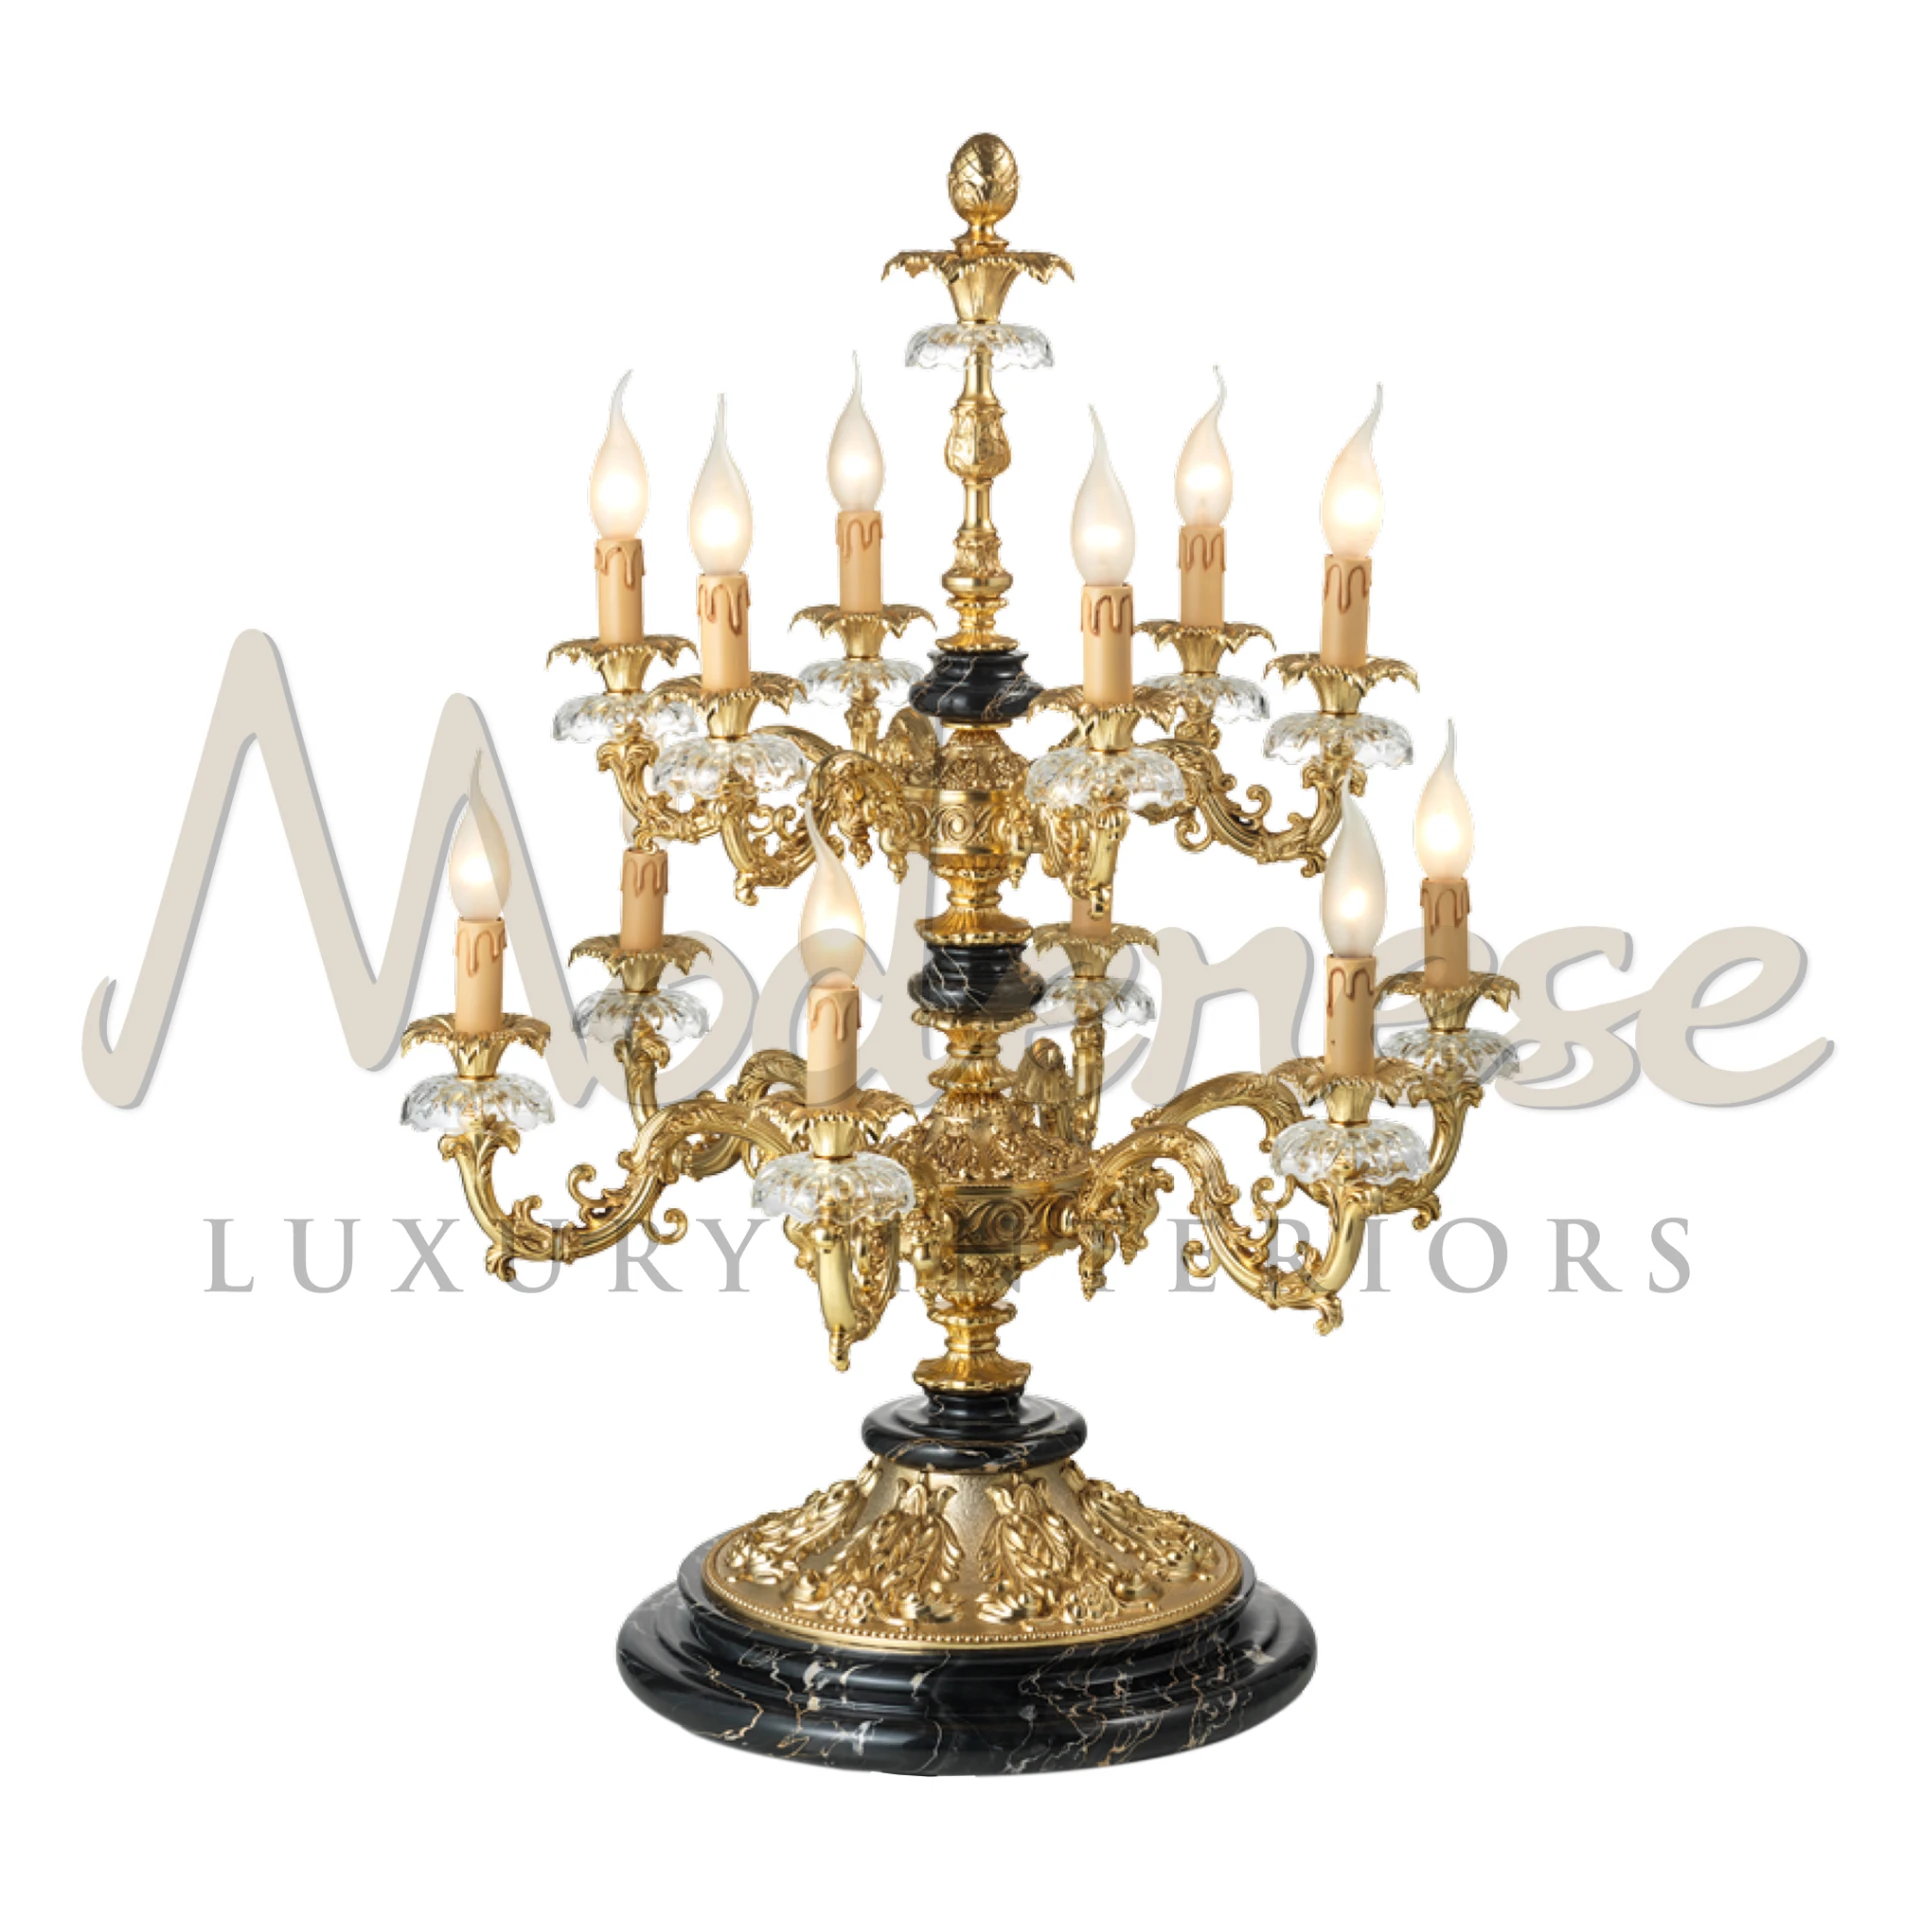 Candelabra Table Lamp with flashy golden arms and glowing candle-like bulbs.